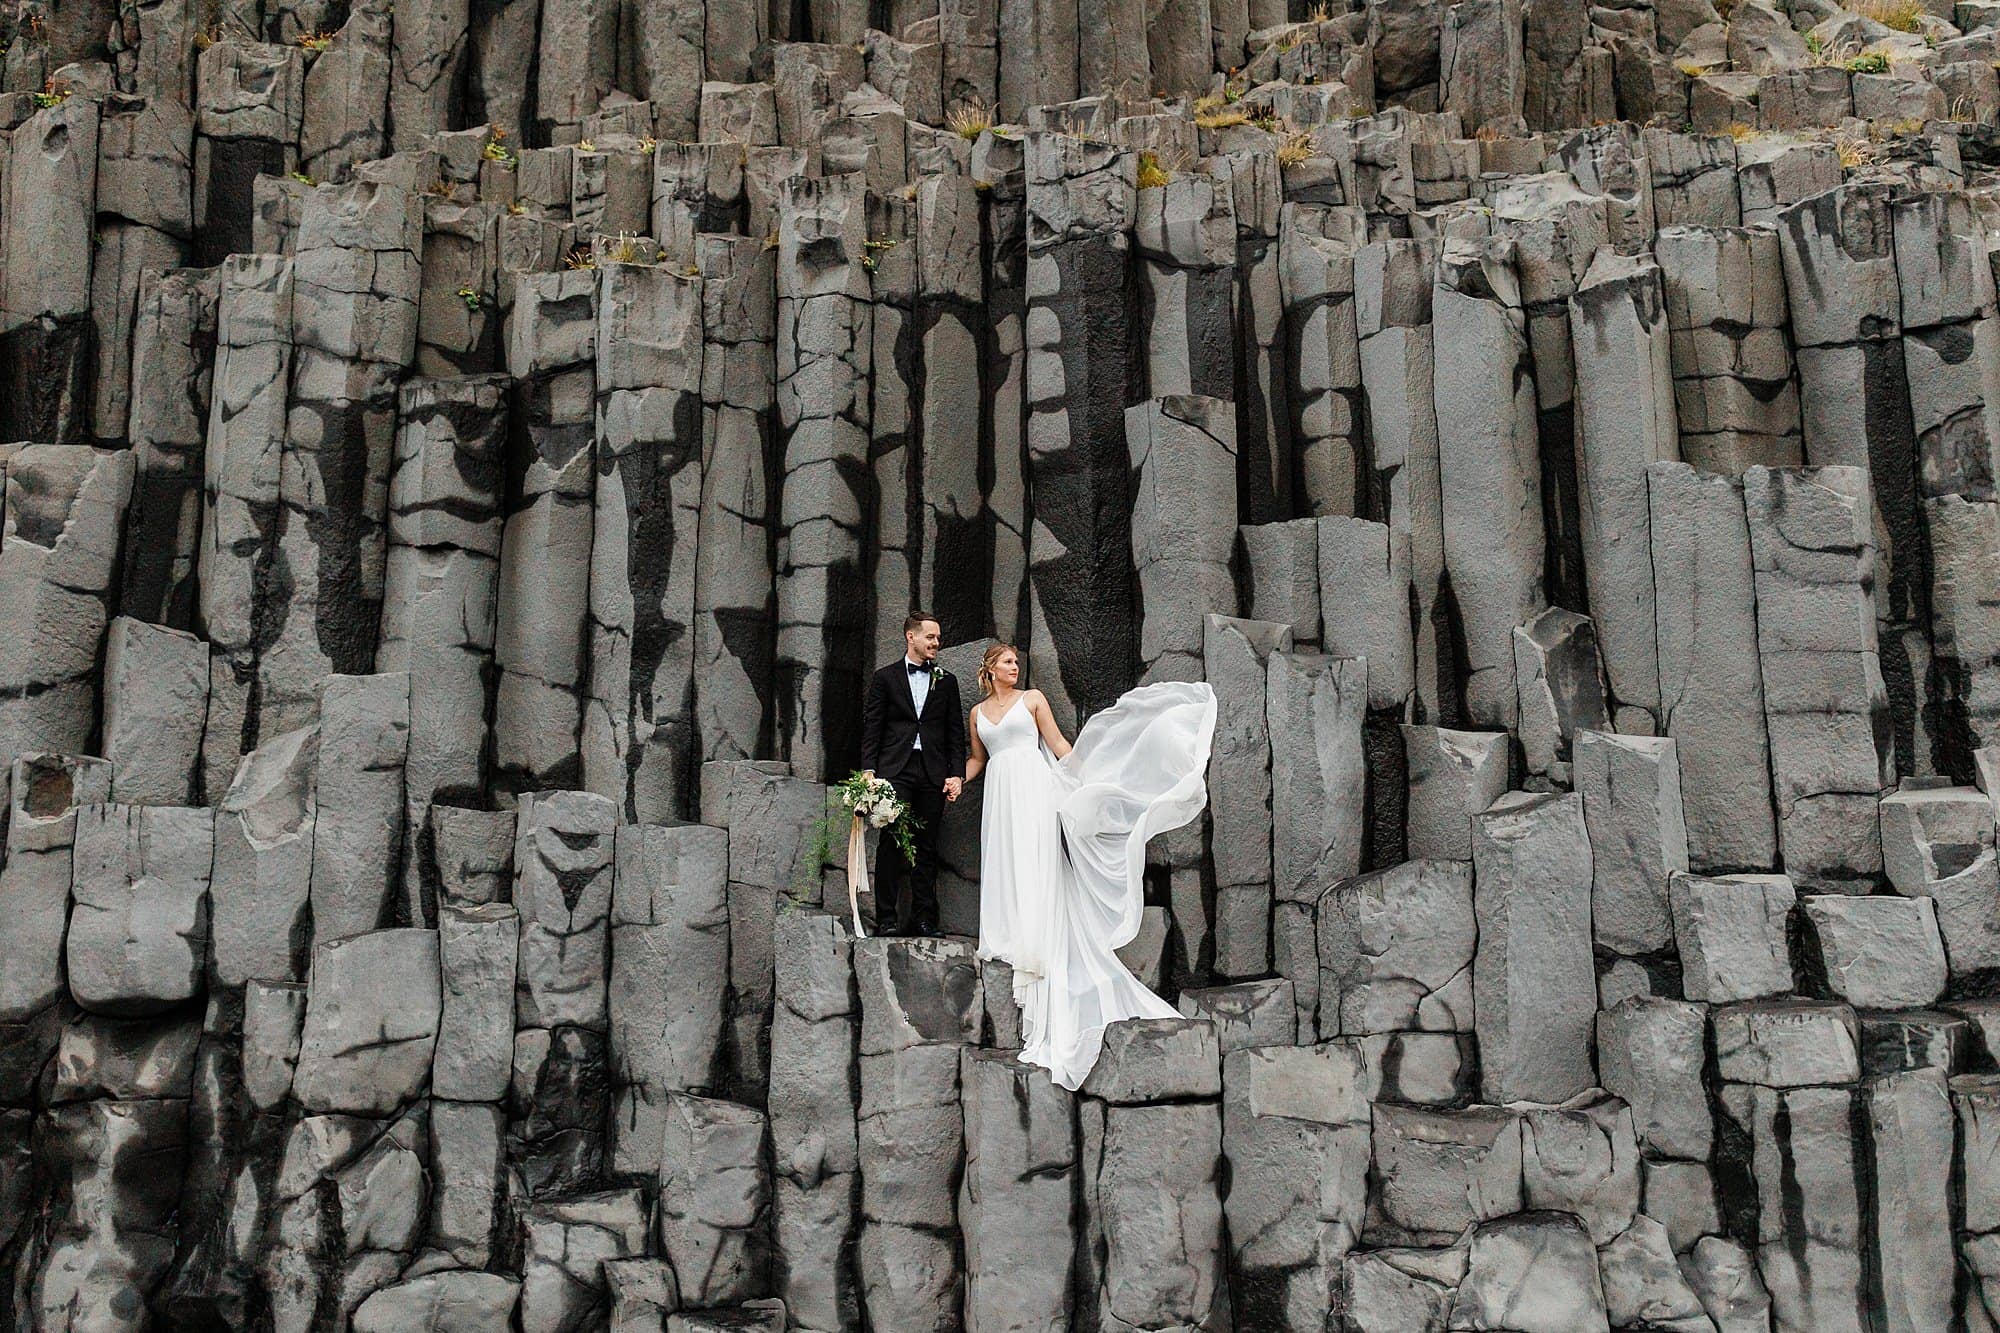 A newly married couple stands on basalt columns at Black Sand Beach in Iceland